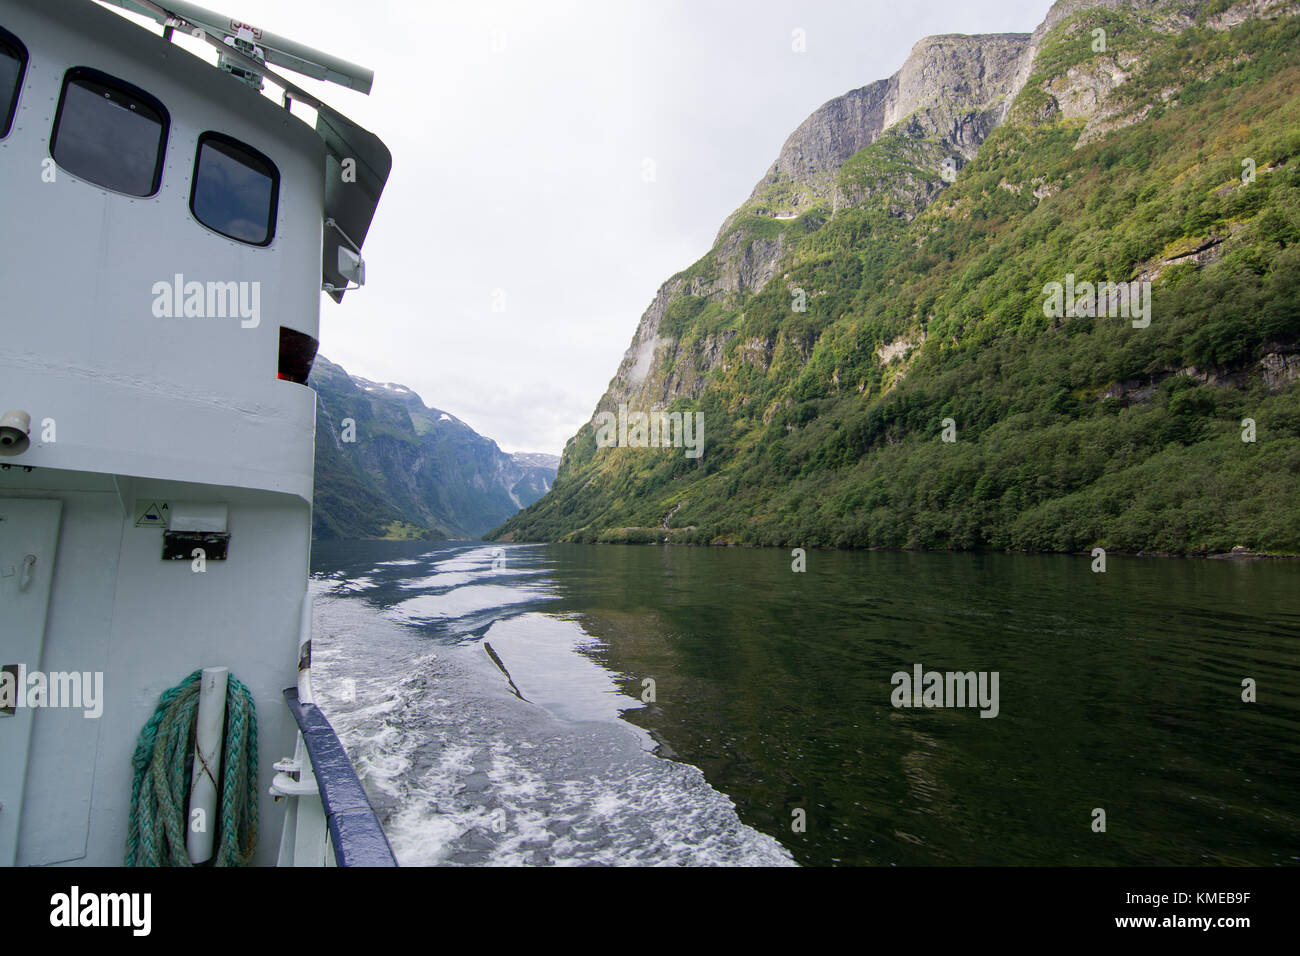 Gudvangen is a village in the municipality of Aurland in Sogn og Fjordane county, Norway. Stock Photo